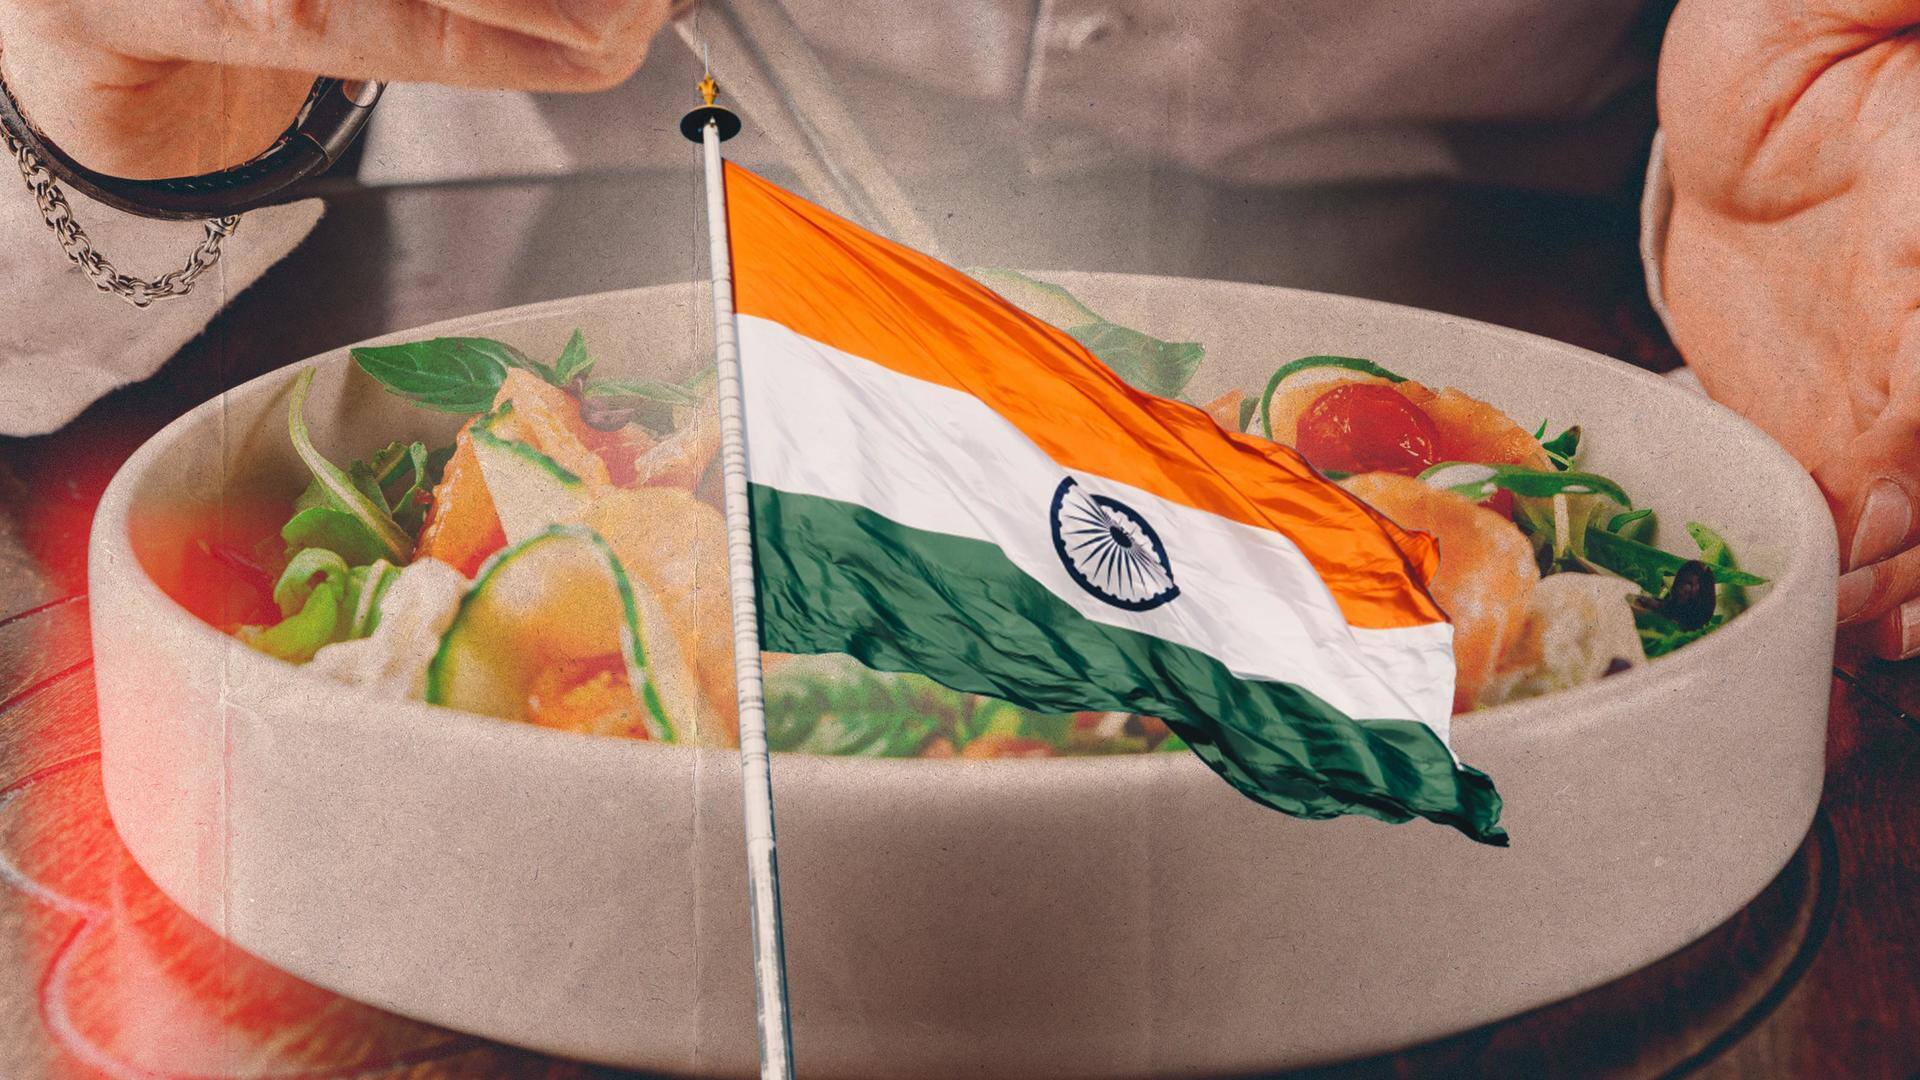 How foreign dishes can be incorporated with Indian ingredients